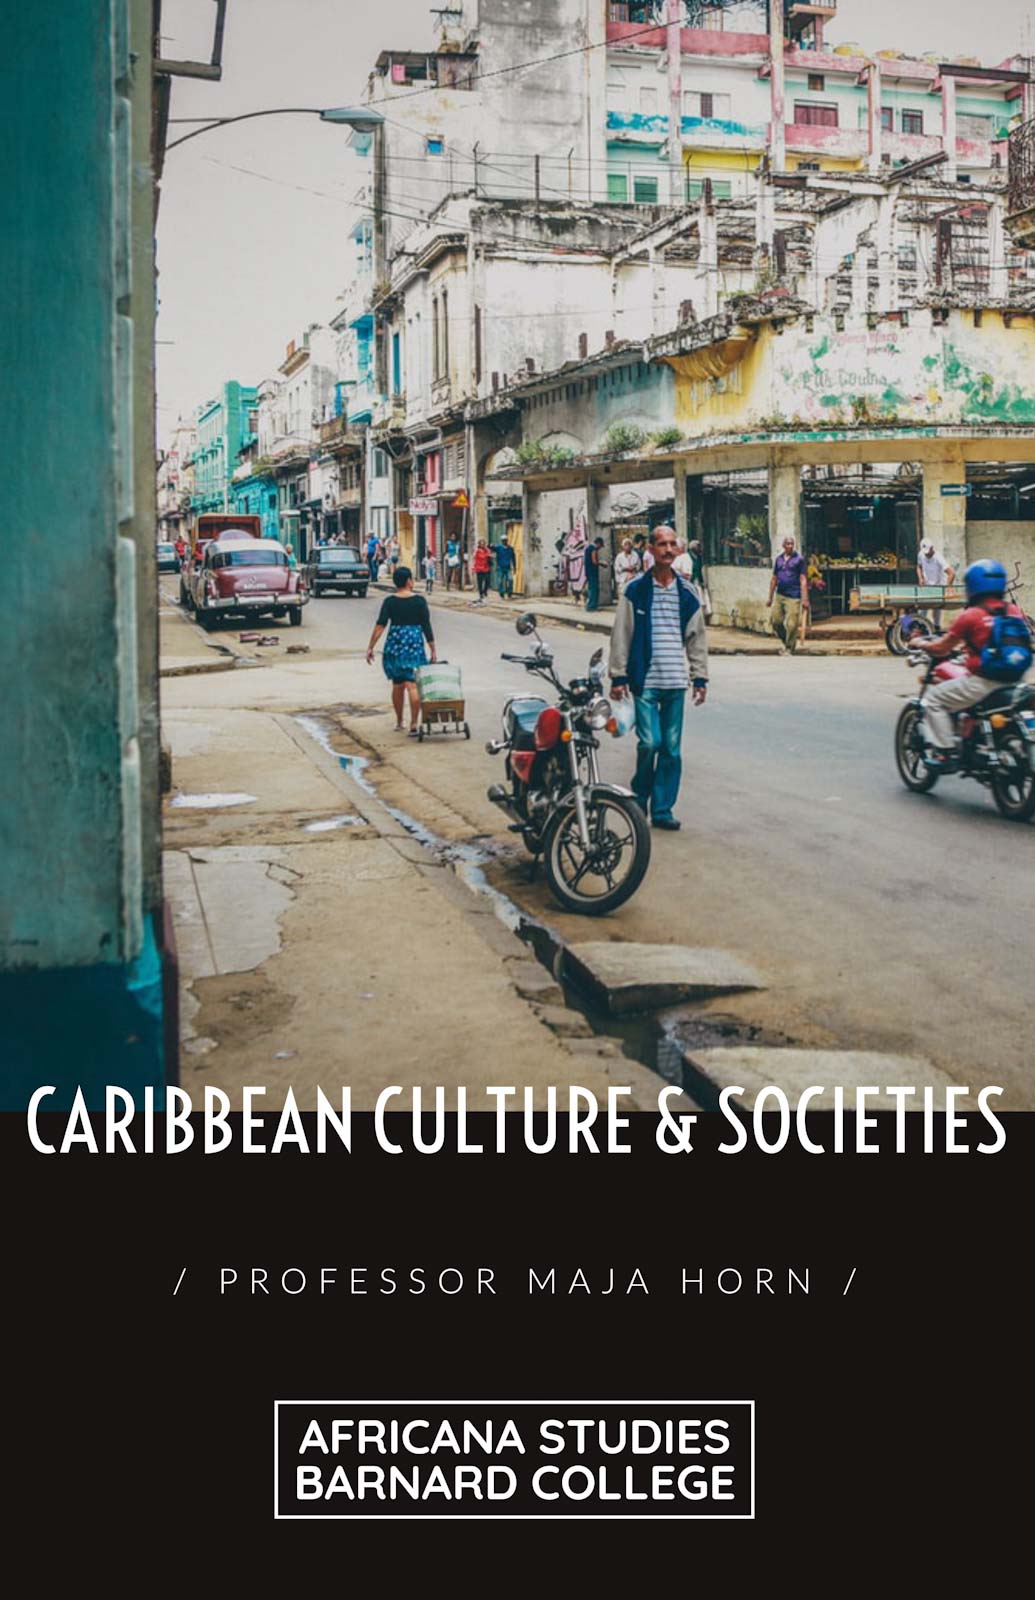 A city street in the Caribbean, part of a class poster for Caribbean Culture & Societies